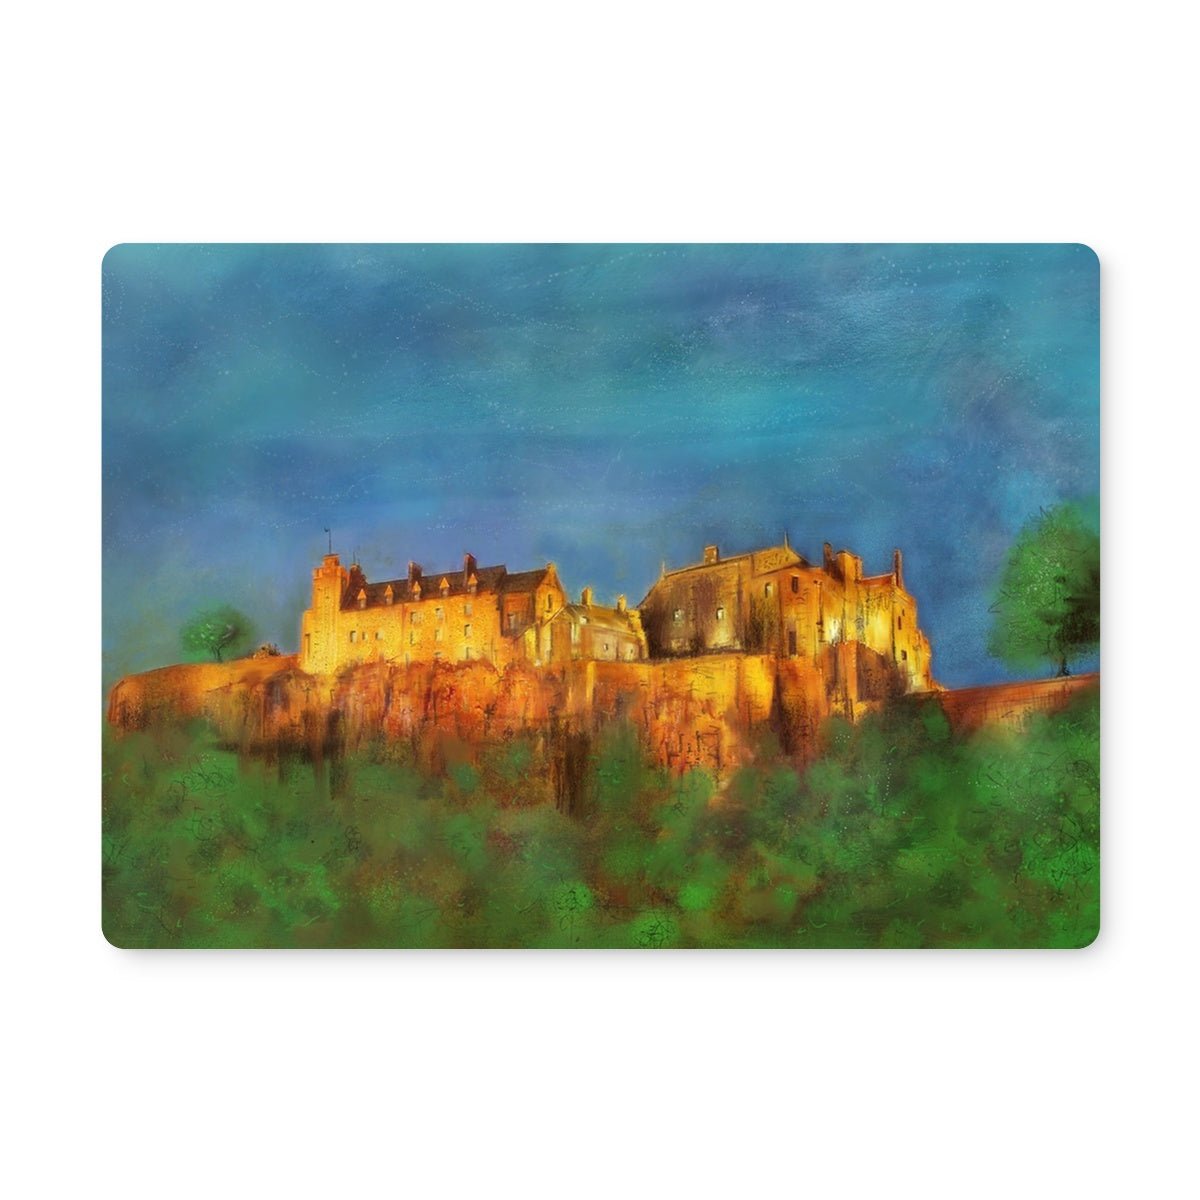 Stirling Castle Art Gifts Placemat-Placemats-Scottish Castles Art Gallery-Single Placemat-Paintings, Prints, Homeware, Art Gifts From Scotland By Scottish Artist Kevin Hunter